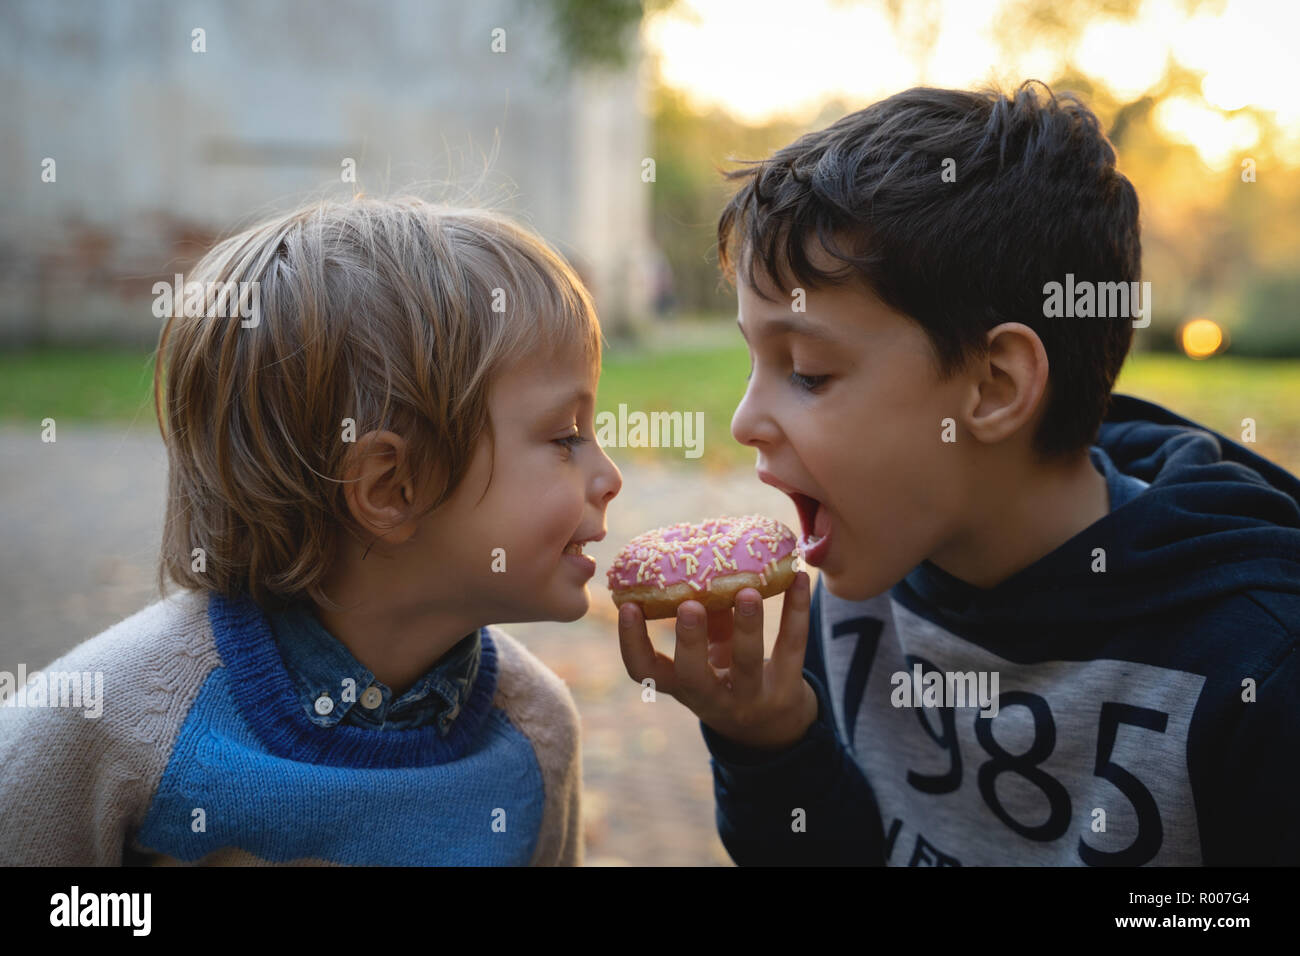 Two caucasian boys eating one donut outdoors closeup. Childhood. Stock Photo